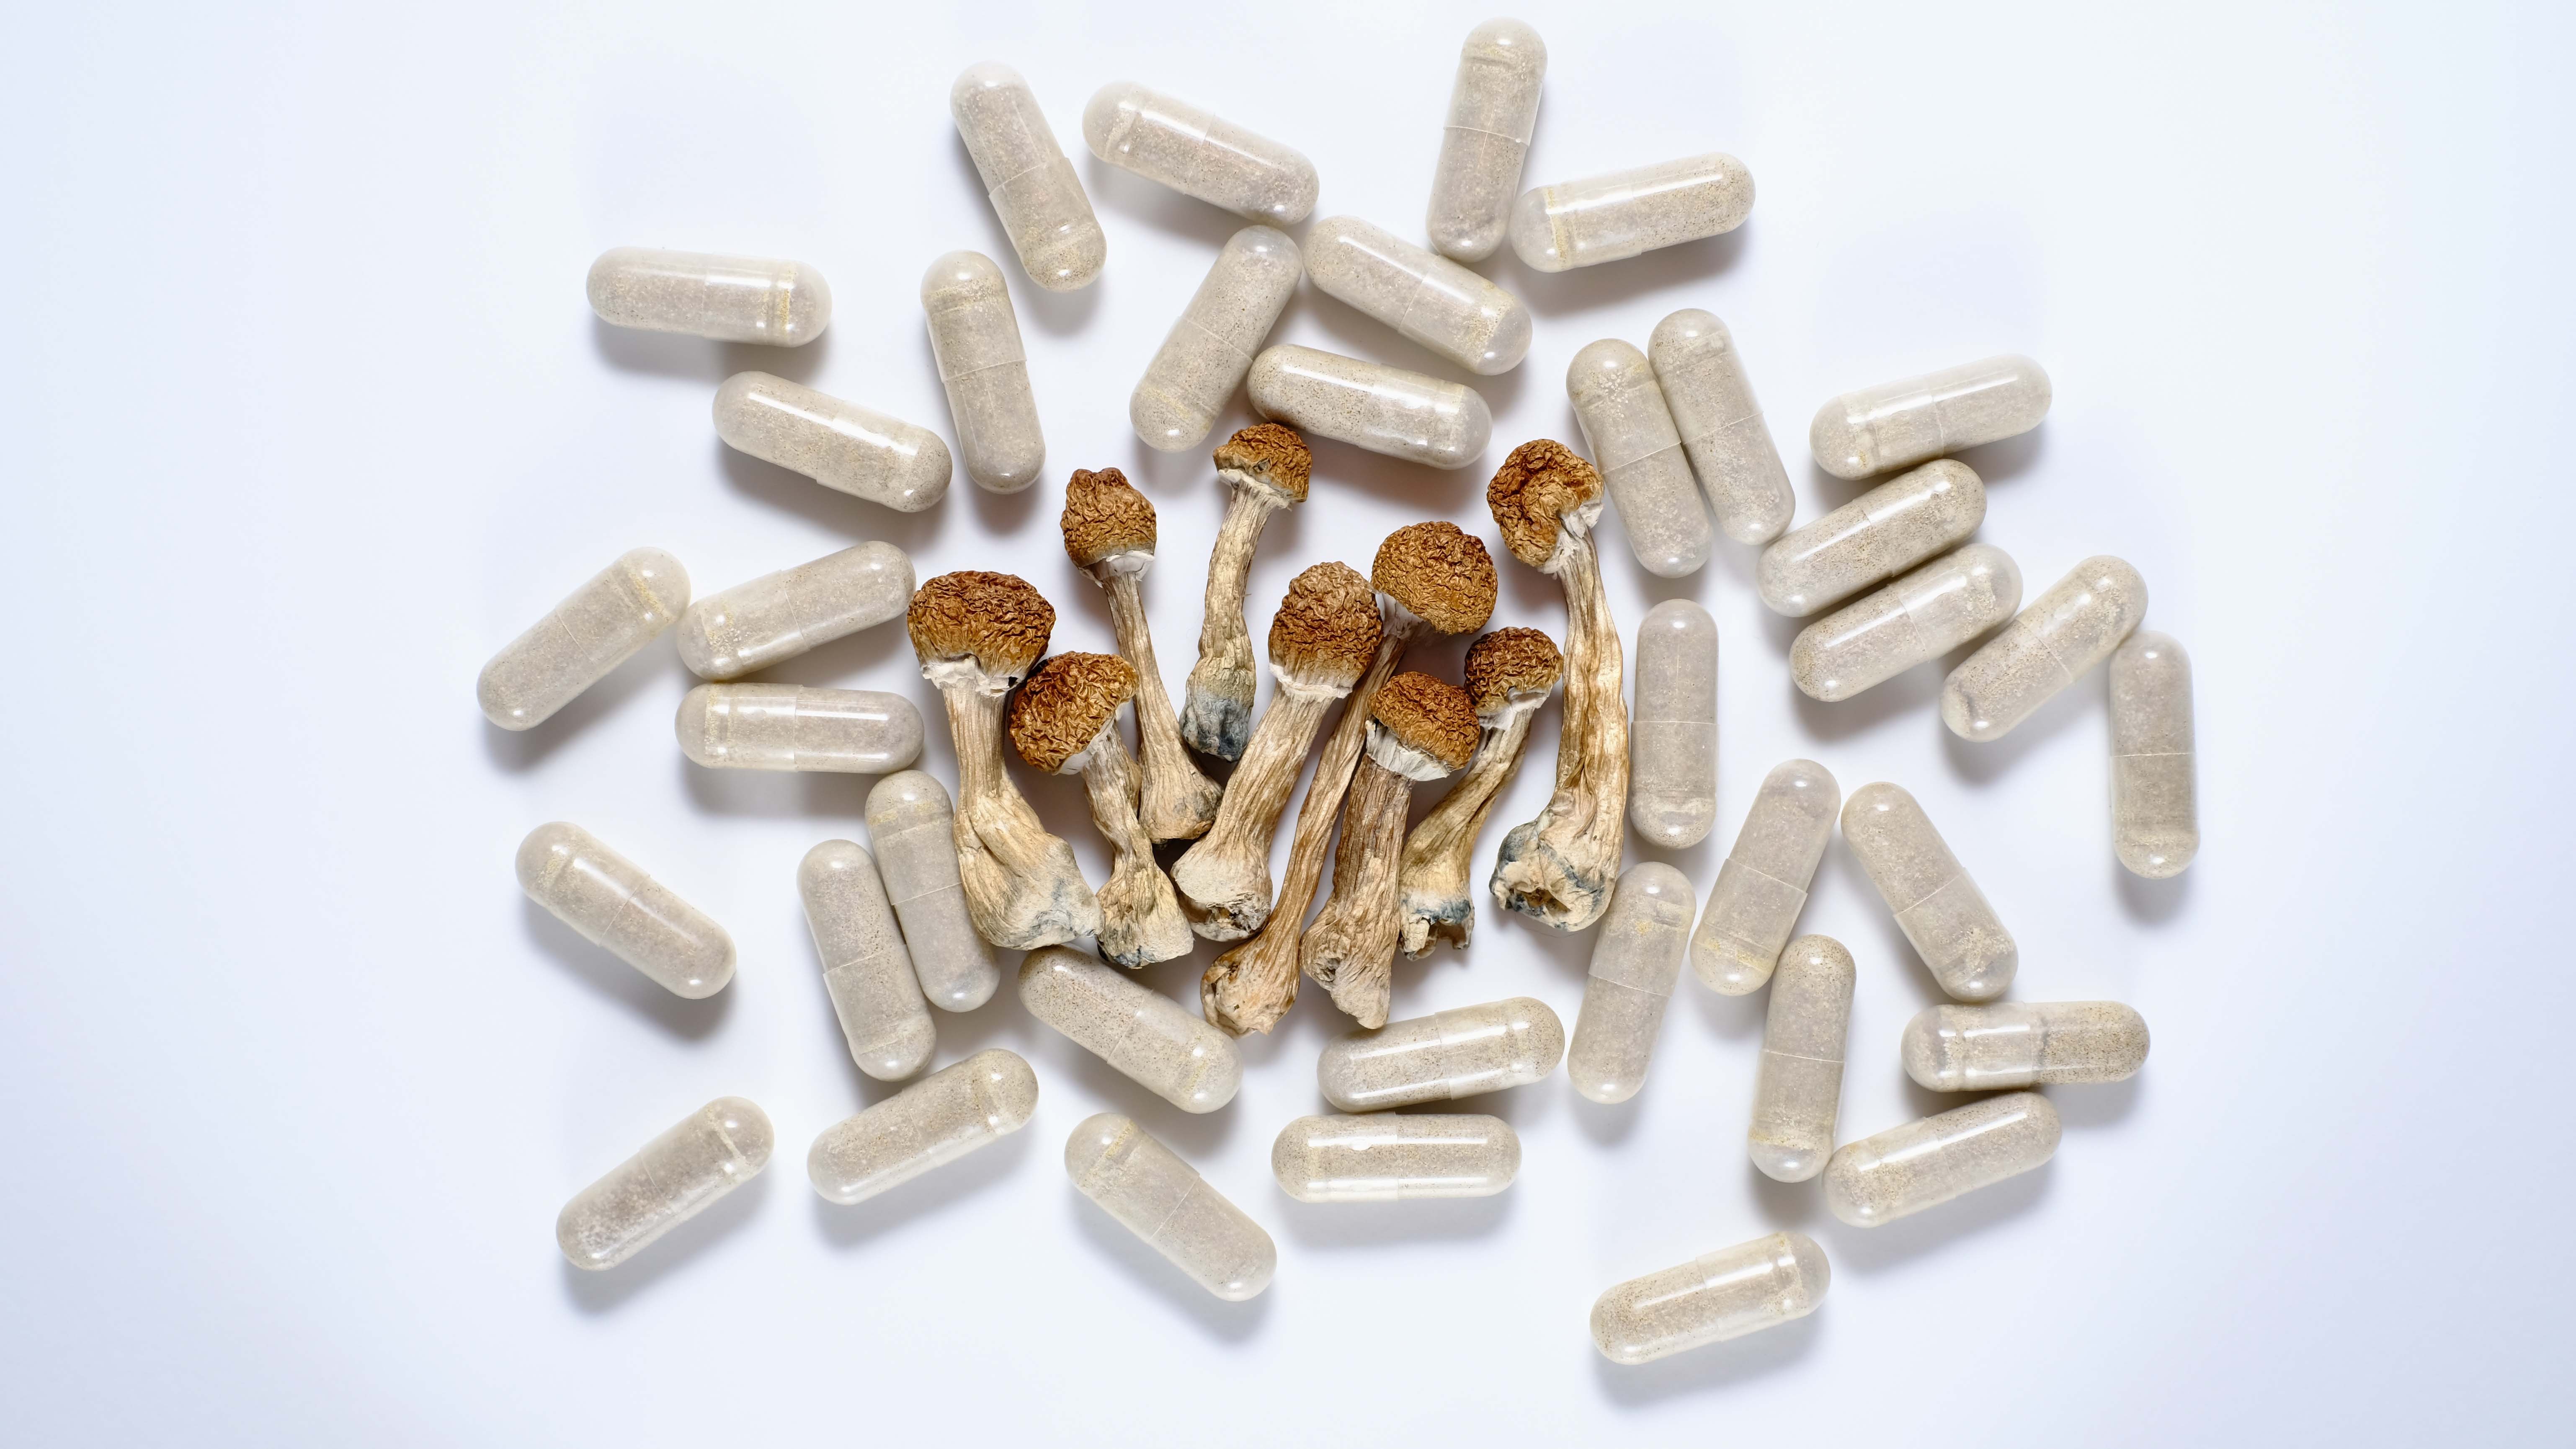 The Veterans Administration has studied alternative treatments for PTSD and depression, including ketamine and psilocybin. The second, also called 'magic mushrooms,' aren't legal in Virginia. (Image: Cannabis Pic via Shutterstock)